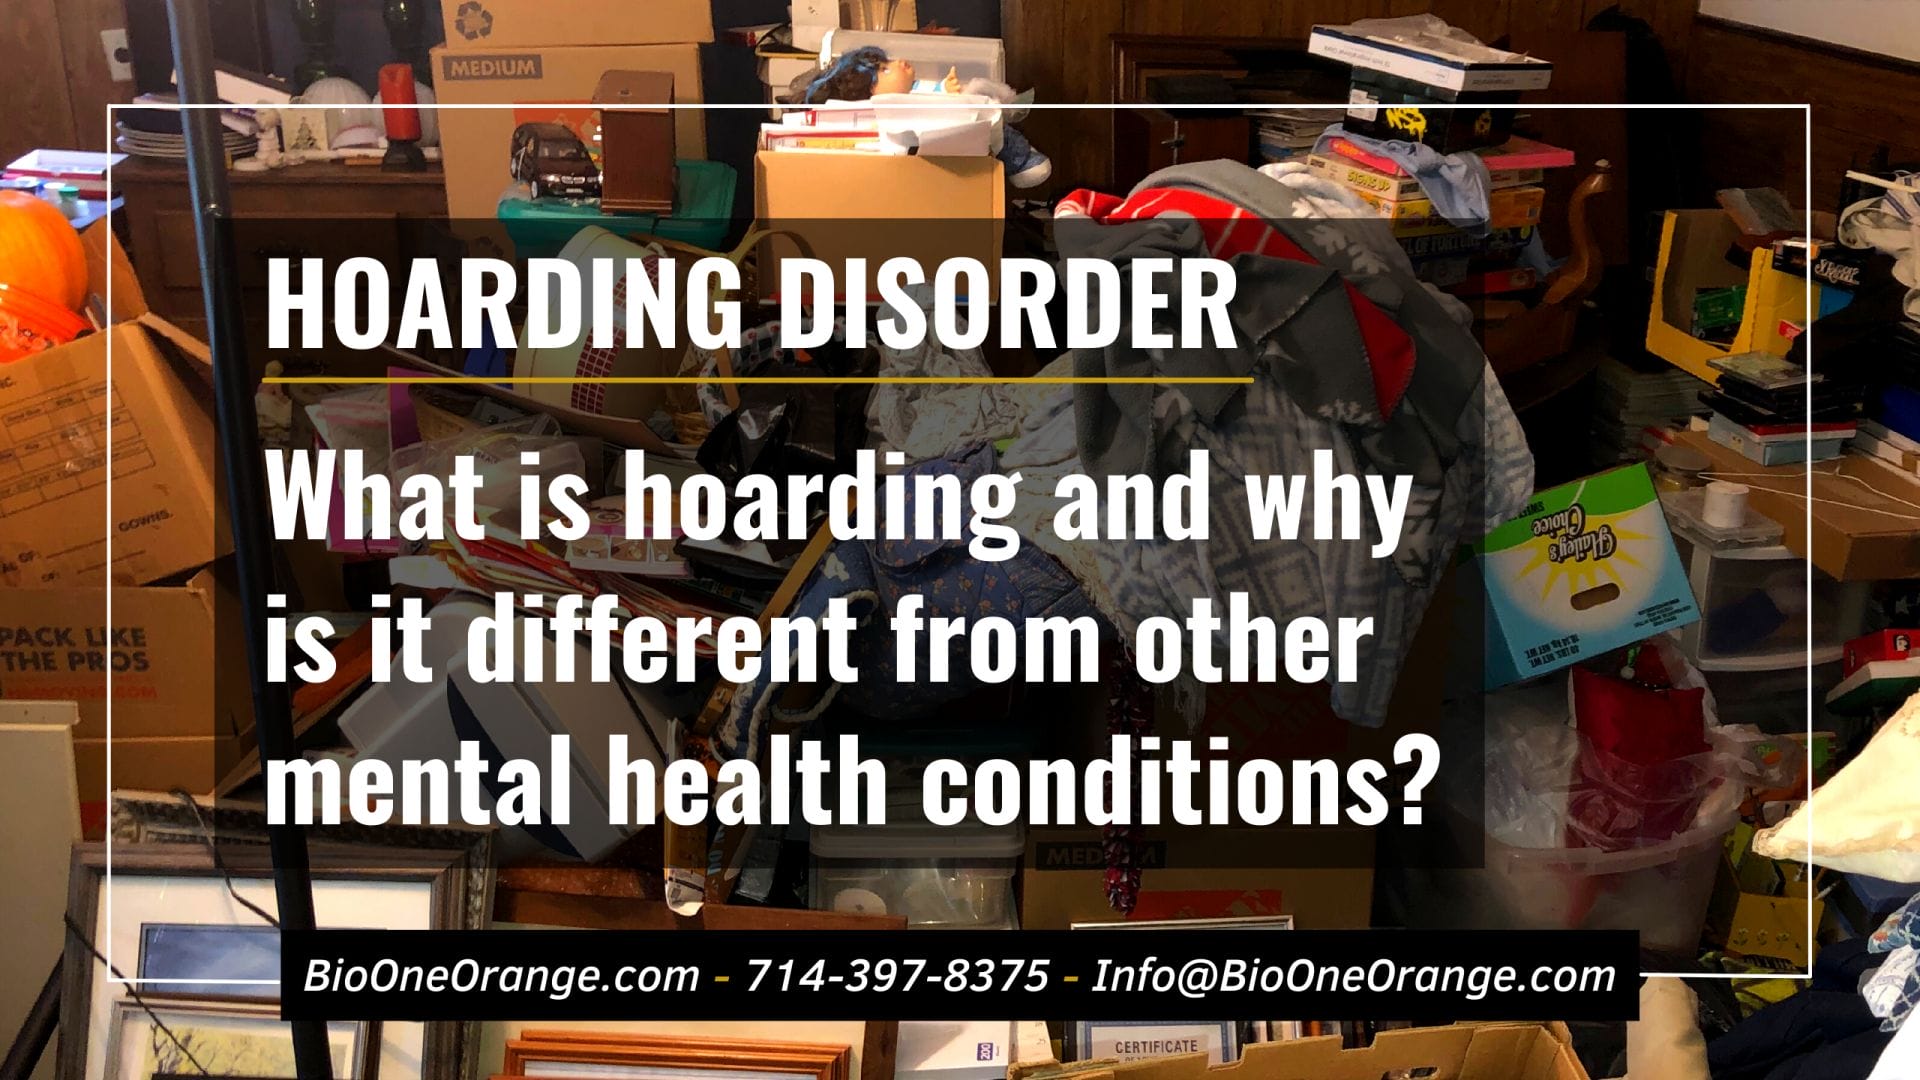 What is hoarding and why is it different from other mental health conditions?